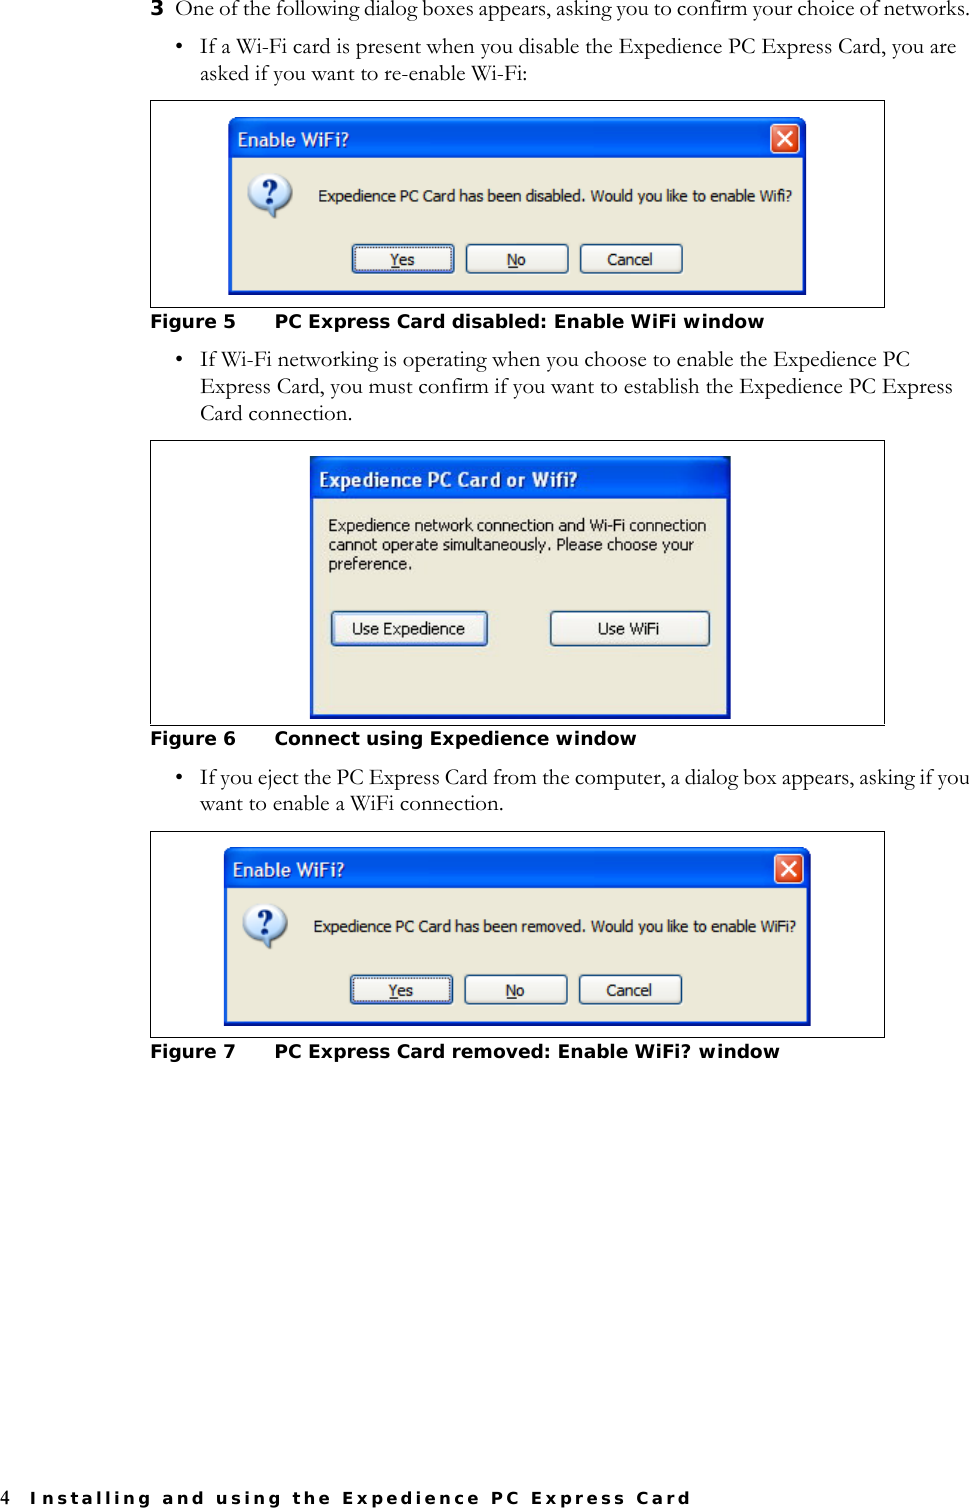 4Installing and using the Expedience PC Express Card3One of the following dialog boxes appears, asking you to confirm your choice of networks. • If a Wi-Fi card is present when you disable the Expedience PC Express Card, you are asked if you want to re-enable Wi-Fi:• If Wi-Fi networking is operating when you choose to enable the Expedience PC Express Card, you must confirm if you want to establish the Expedience PC Express Card connection. • If you eject the PC Express Card from the computer, a dialog box appears, asking if you want to enable a WiFi connection. Figure 5 PC Express Card disabled: Enable WiFi windowFigure 6 Connect using Expedience windowFigure 7 PC Express Card removed: Enable WiFi? window